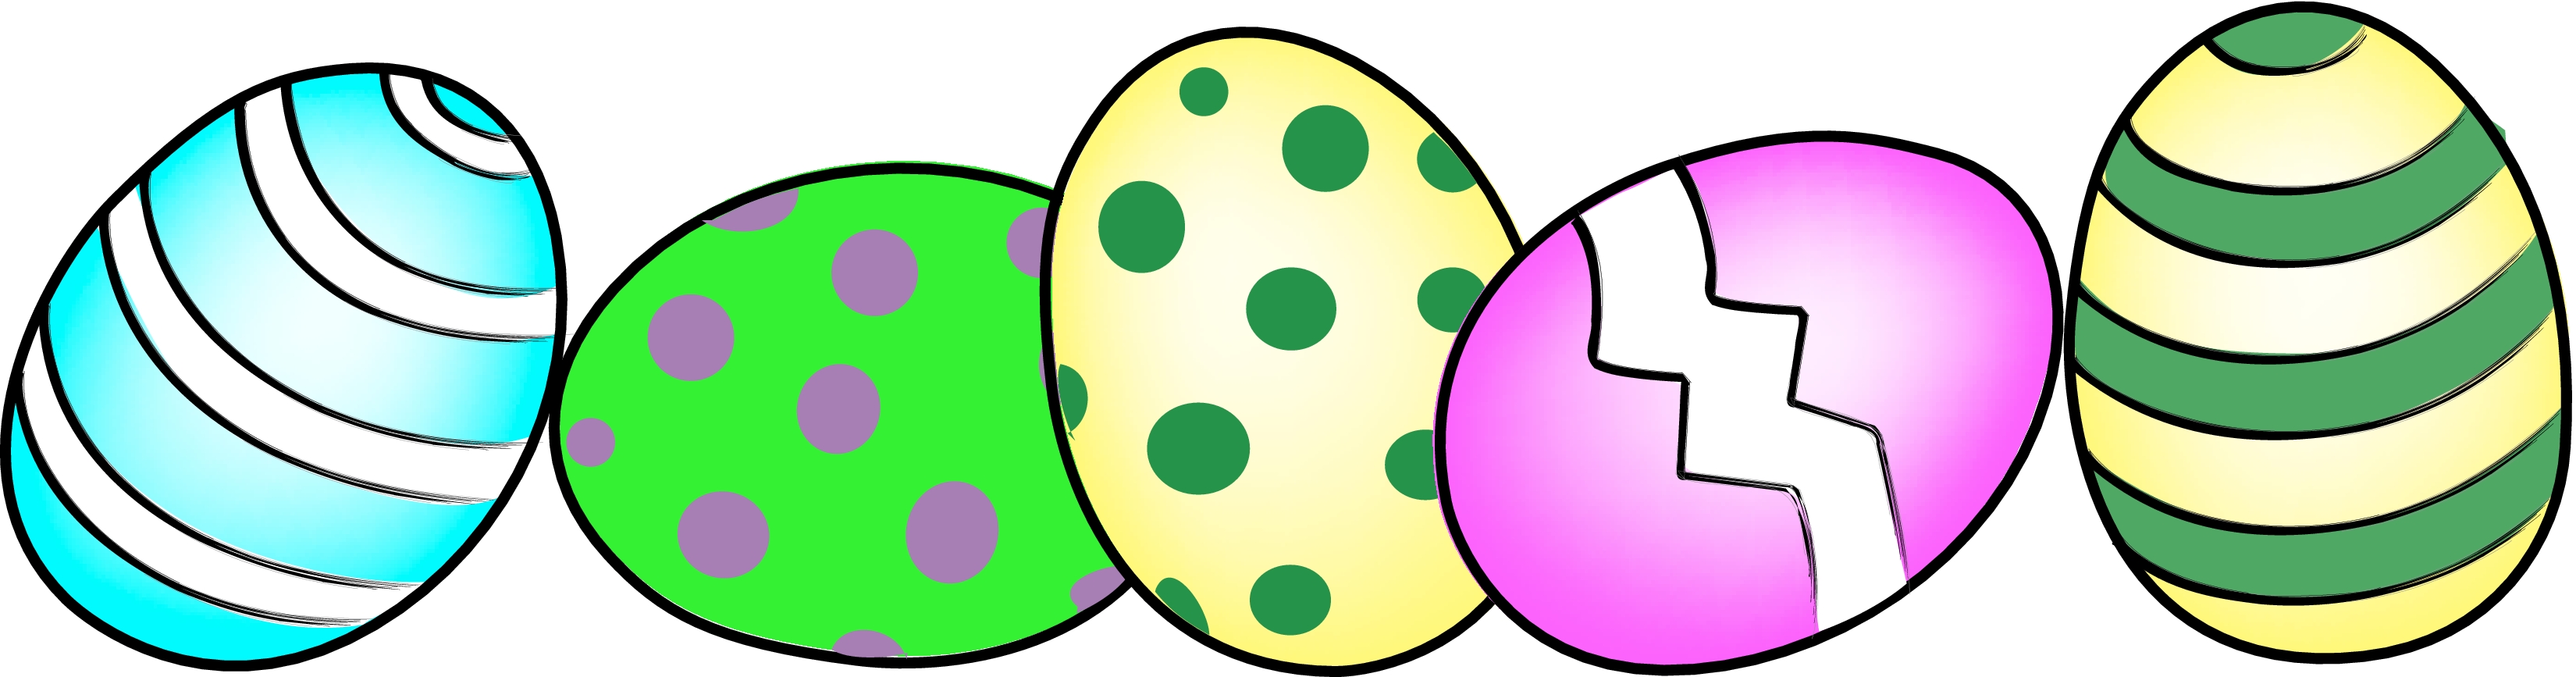 free easter graphics clipart - photo #10